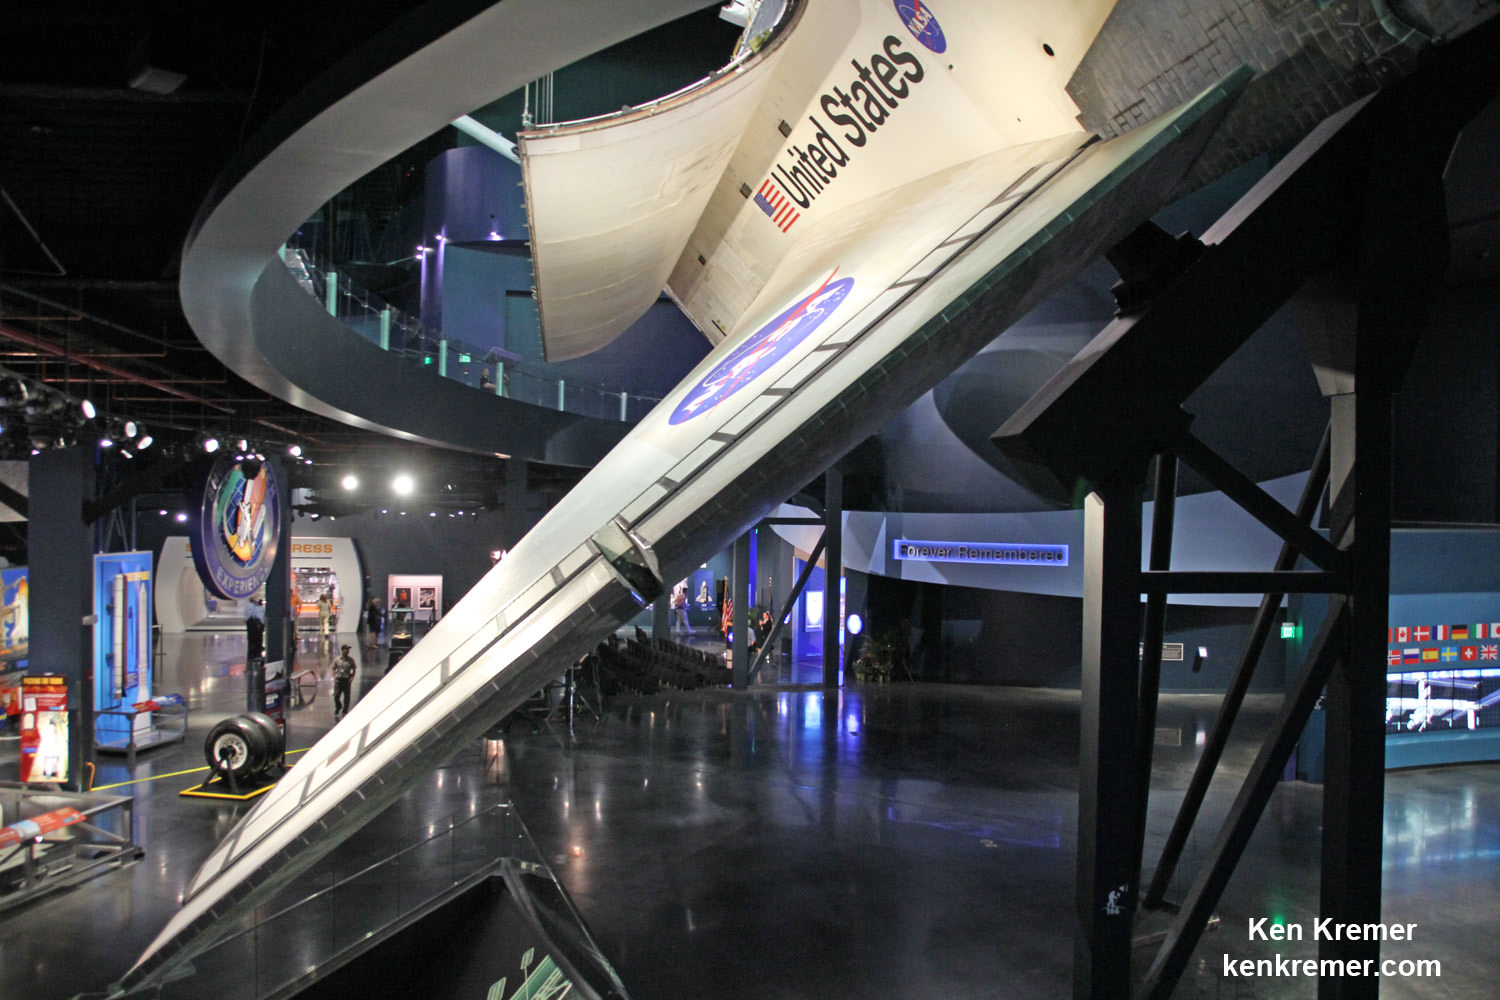 “Forever Remembered” public memorial tribute to the fallen crews of the Columbia and Challenger Space Shuttle orbiters is located on the ground floor of the Space Shuttle Atlantis exhibit at the Kennedy Space Center Visitor Complex in Florida, visible just below the shuttle wing in this photo.  Credit: Ken Kremer/kenkremer.com